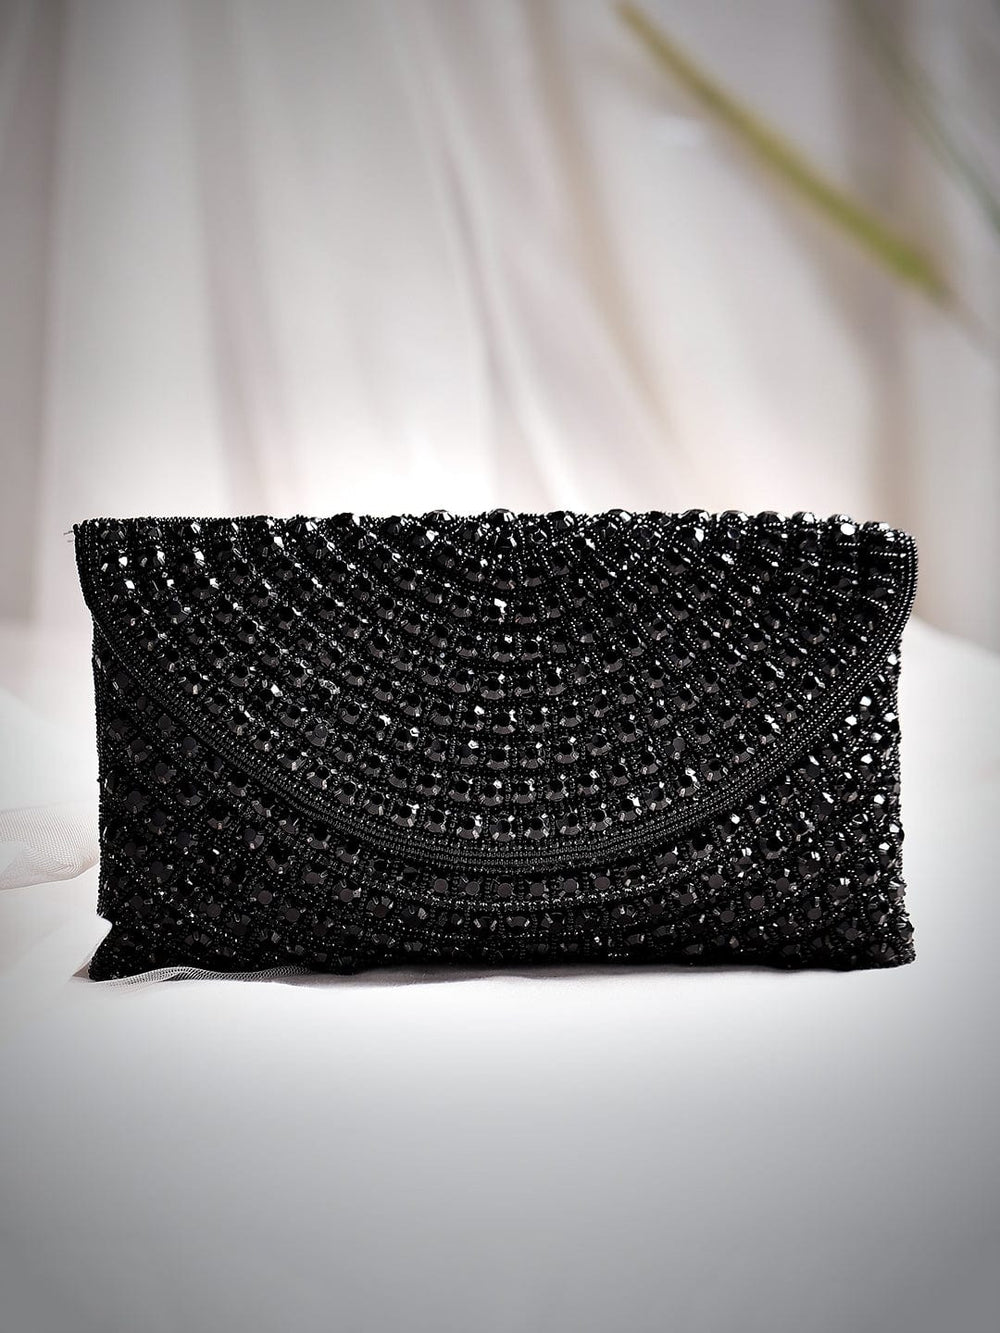 Rubans Black Handmade Sling Bag With Embroided And Studded Black Beads. Handbag & Wallet Accessories